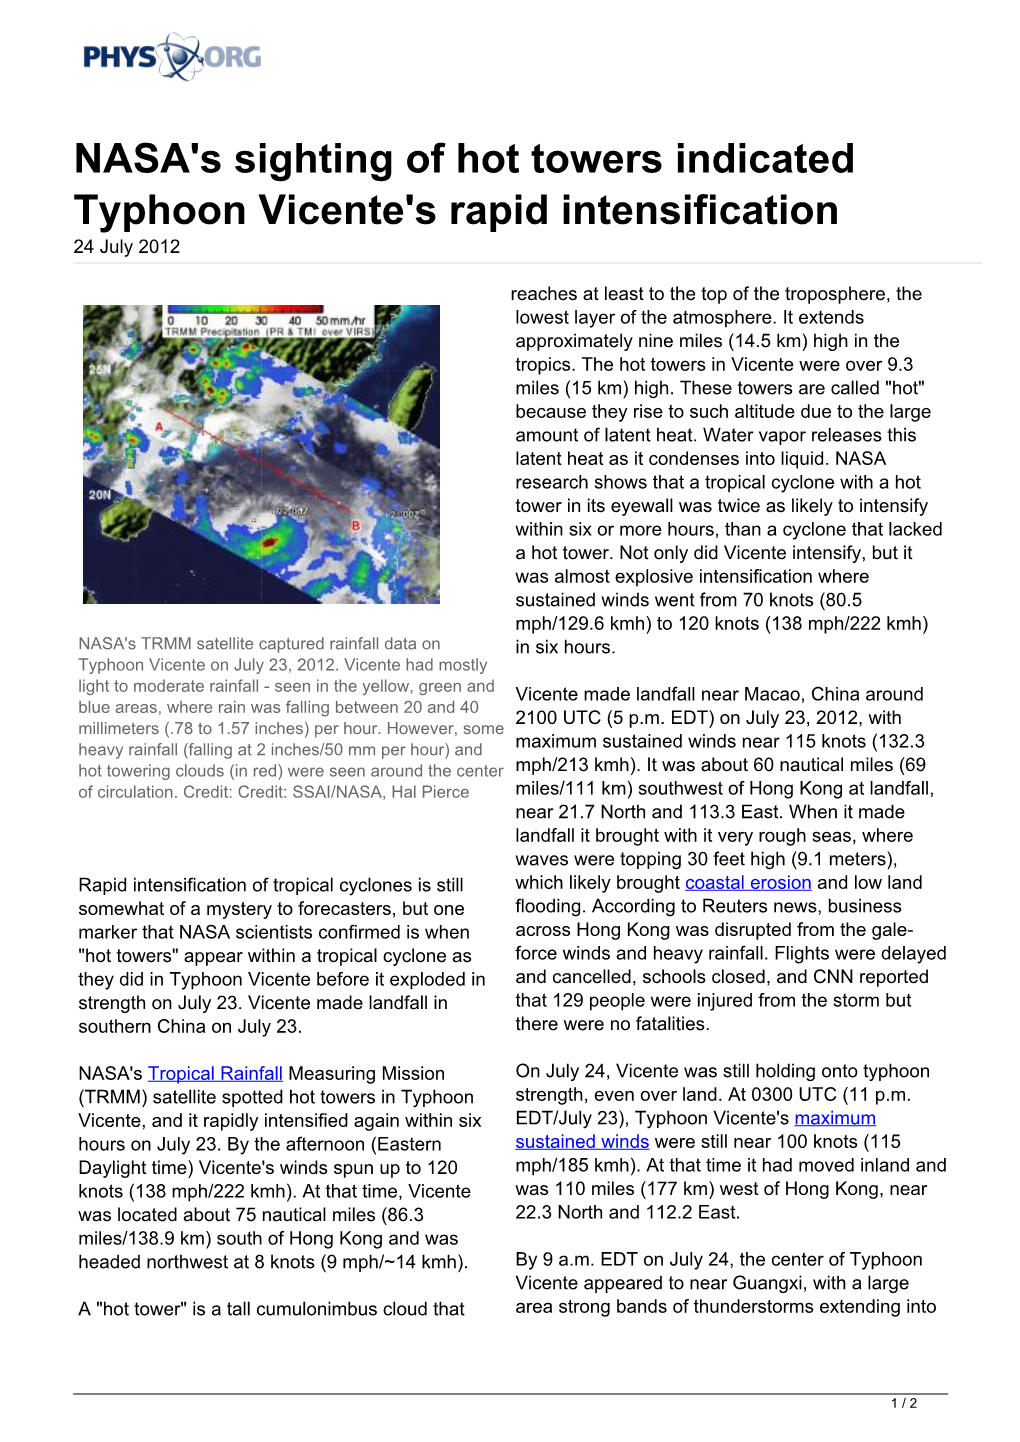 NASA's Sighting of Hot Towers Indicated Typhoon Vicente's Rapid Intensification 24 July 2012